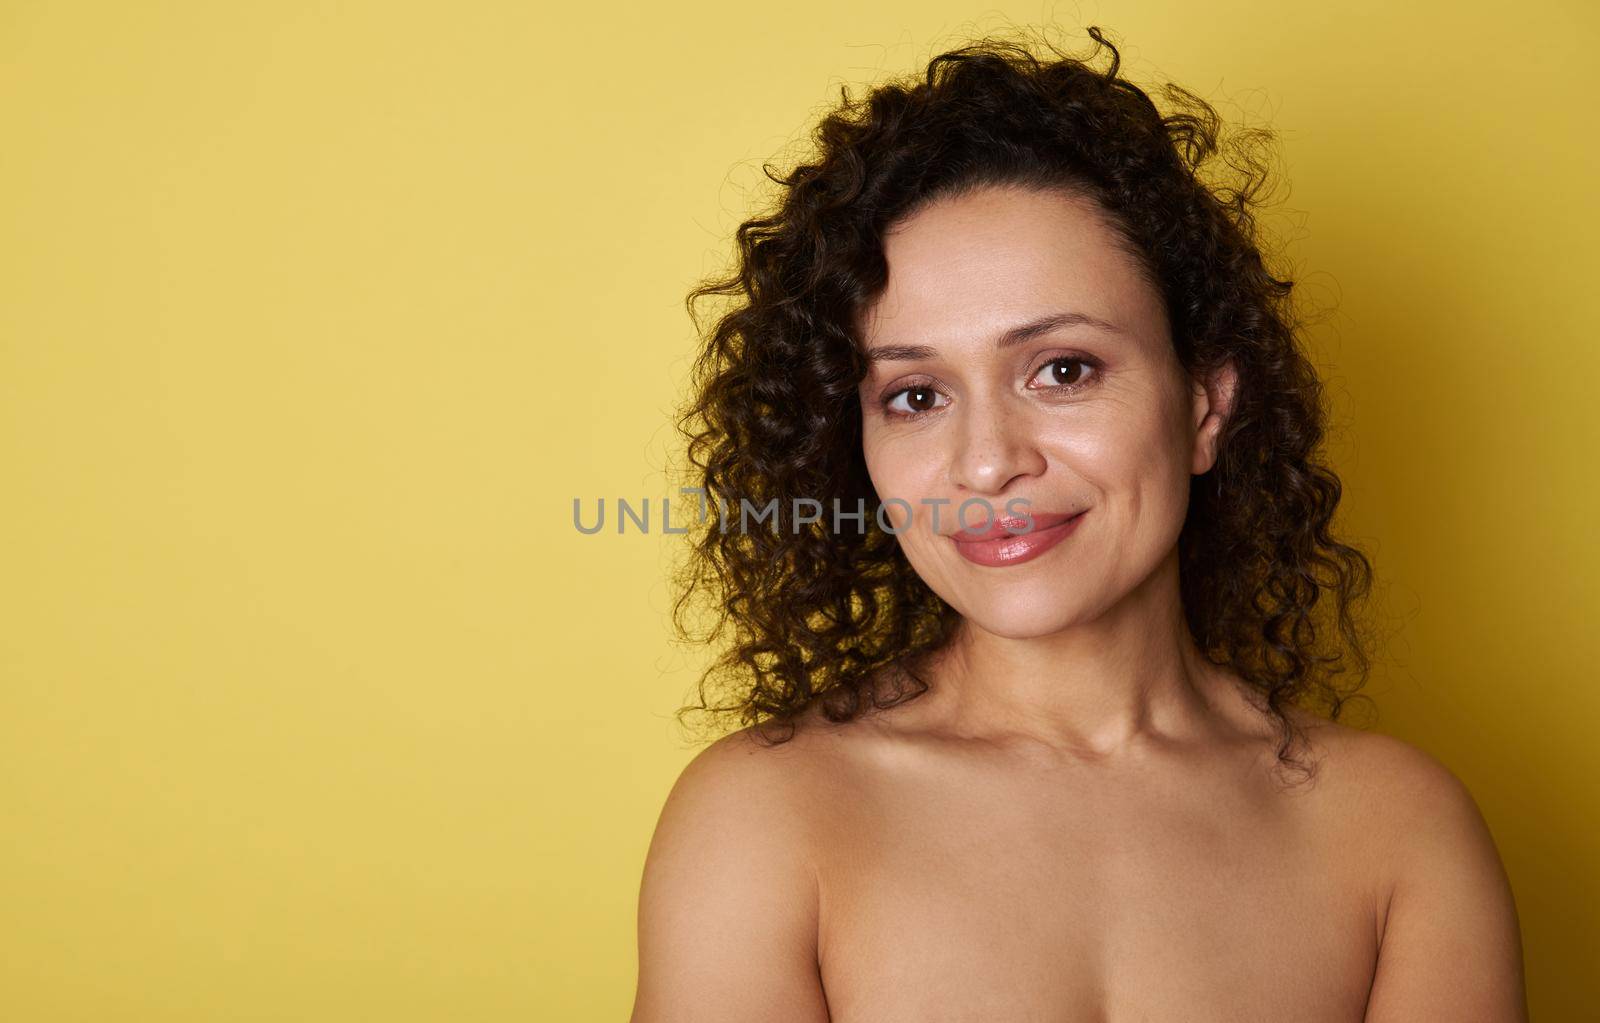 Young hispanic woman with curly hair cute smiling at the camera while standing on yellow background with copy space. Beauty portrait